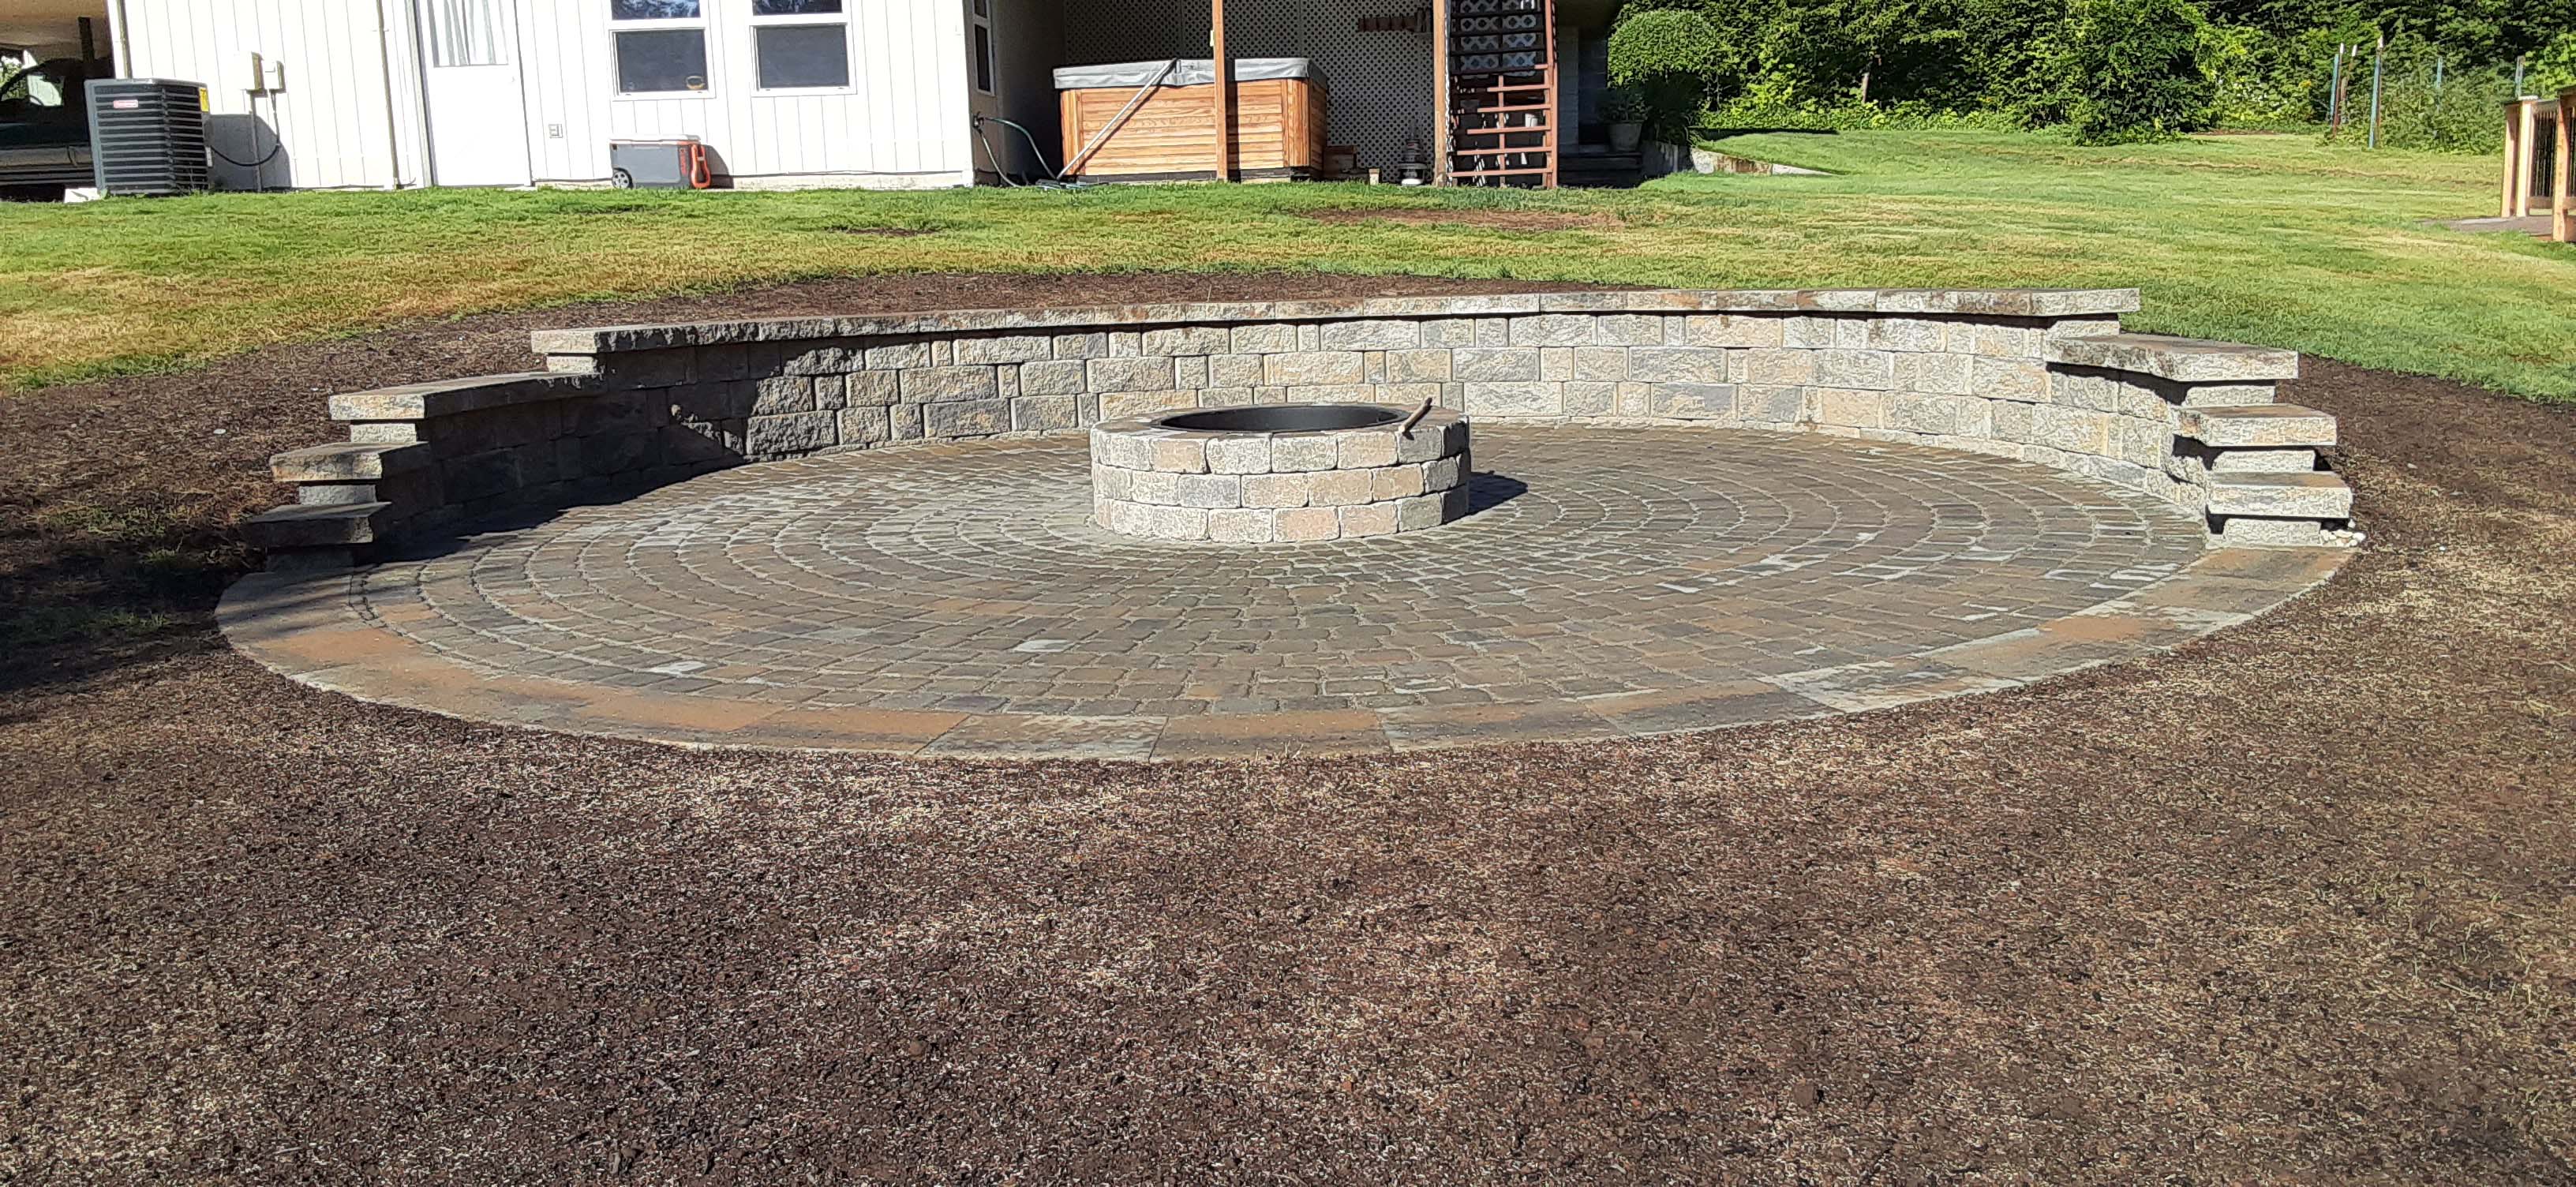 Large fire pit area with large brick retaining wall, big enough to sit plenty of people